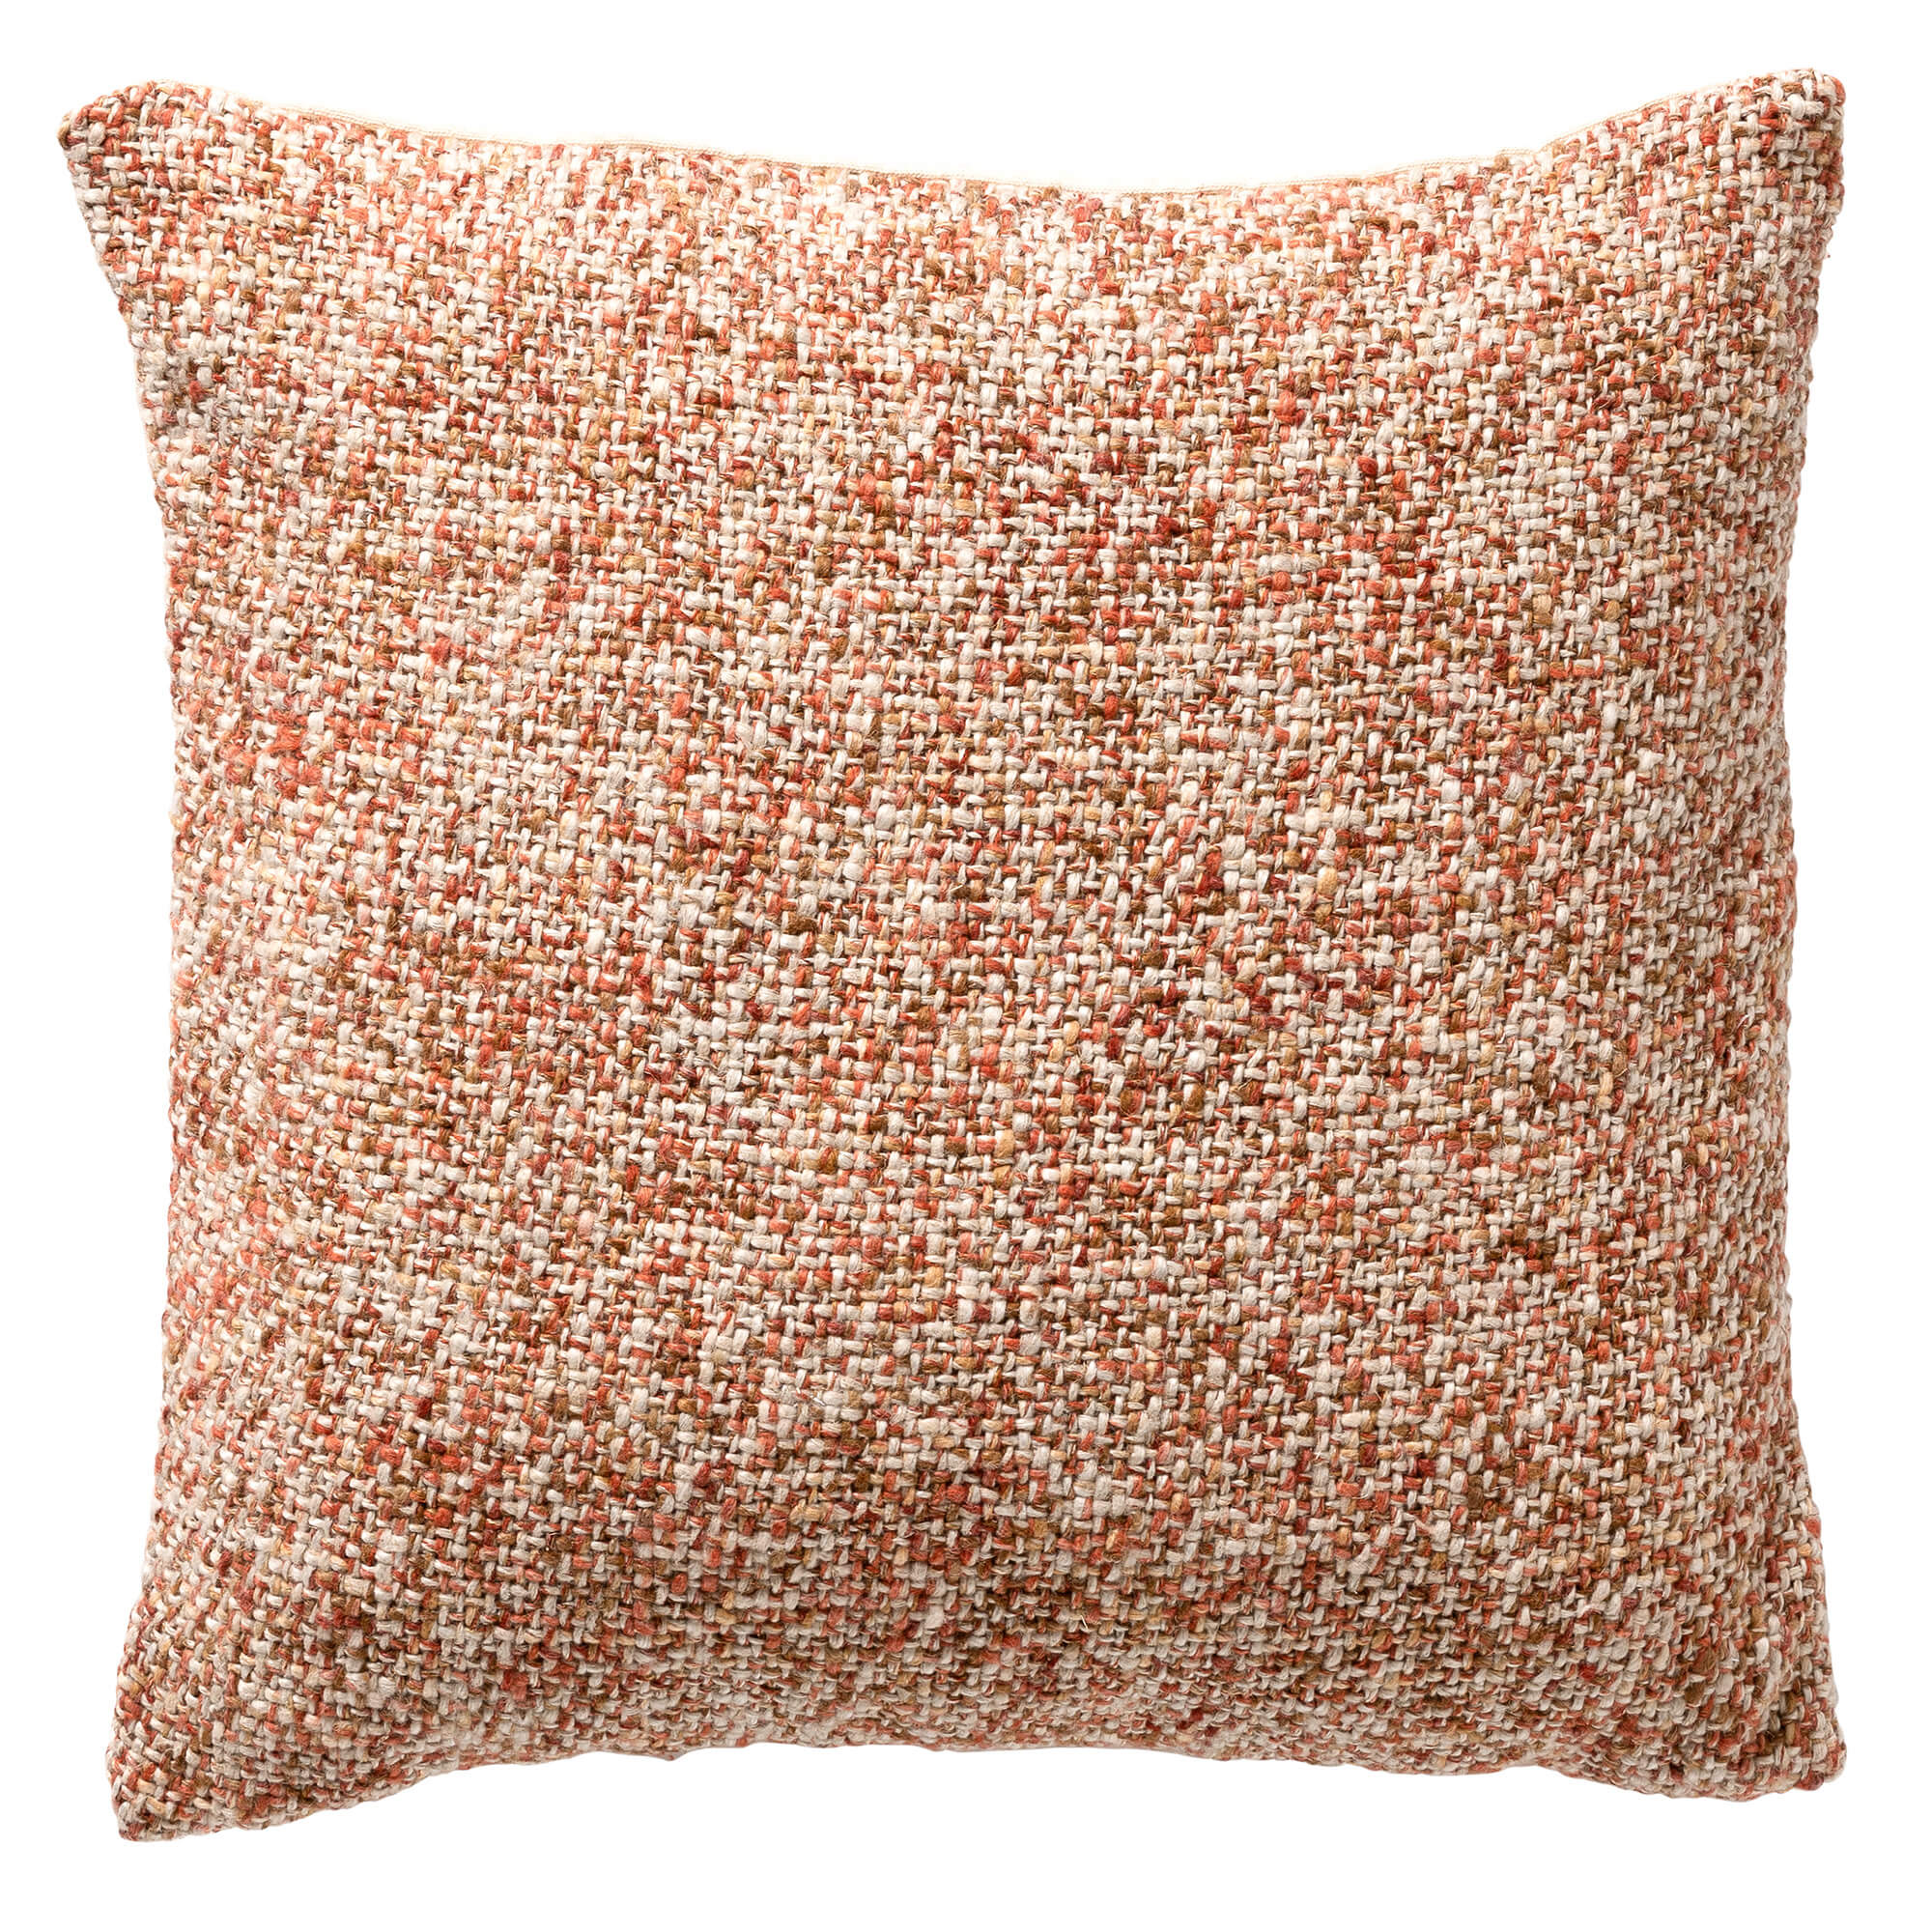 JOEY - Cushion 45x45 cm with cushion cover made of 70% gerecycled cotton - Eco Line collection - Potters Clay - orange